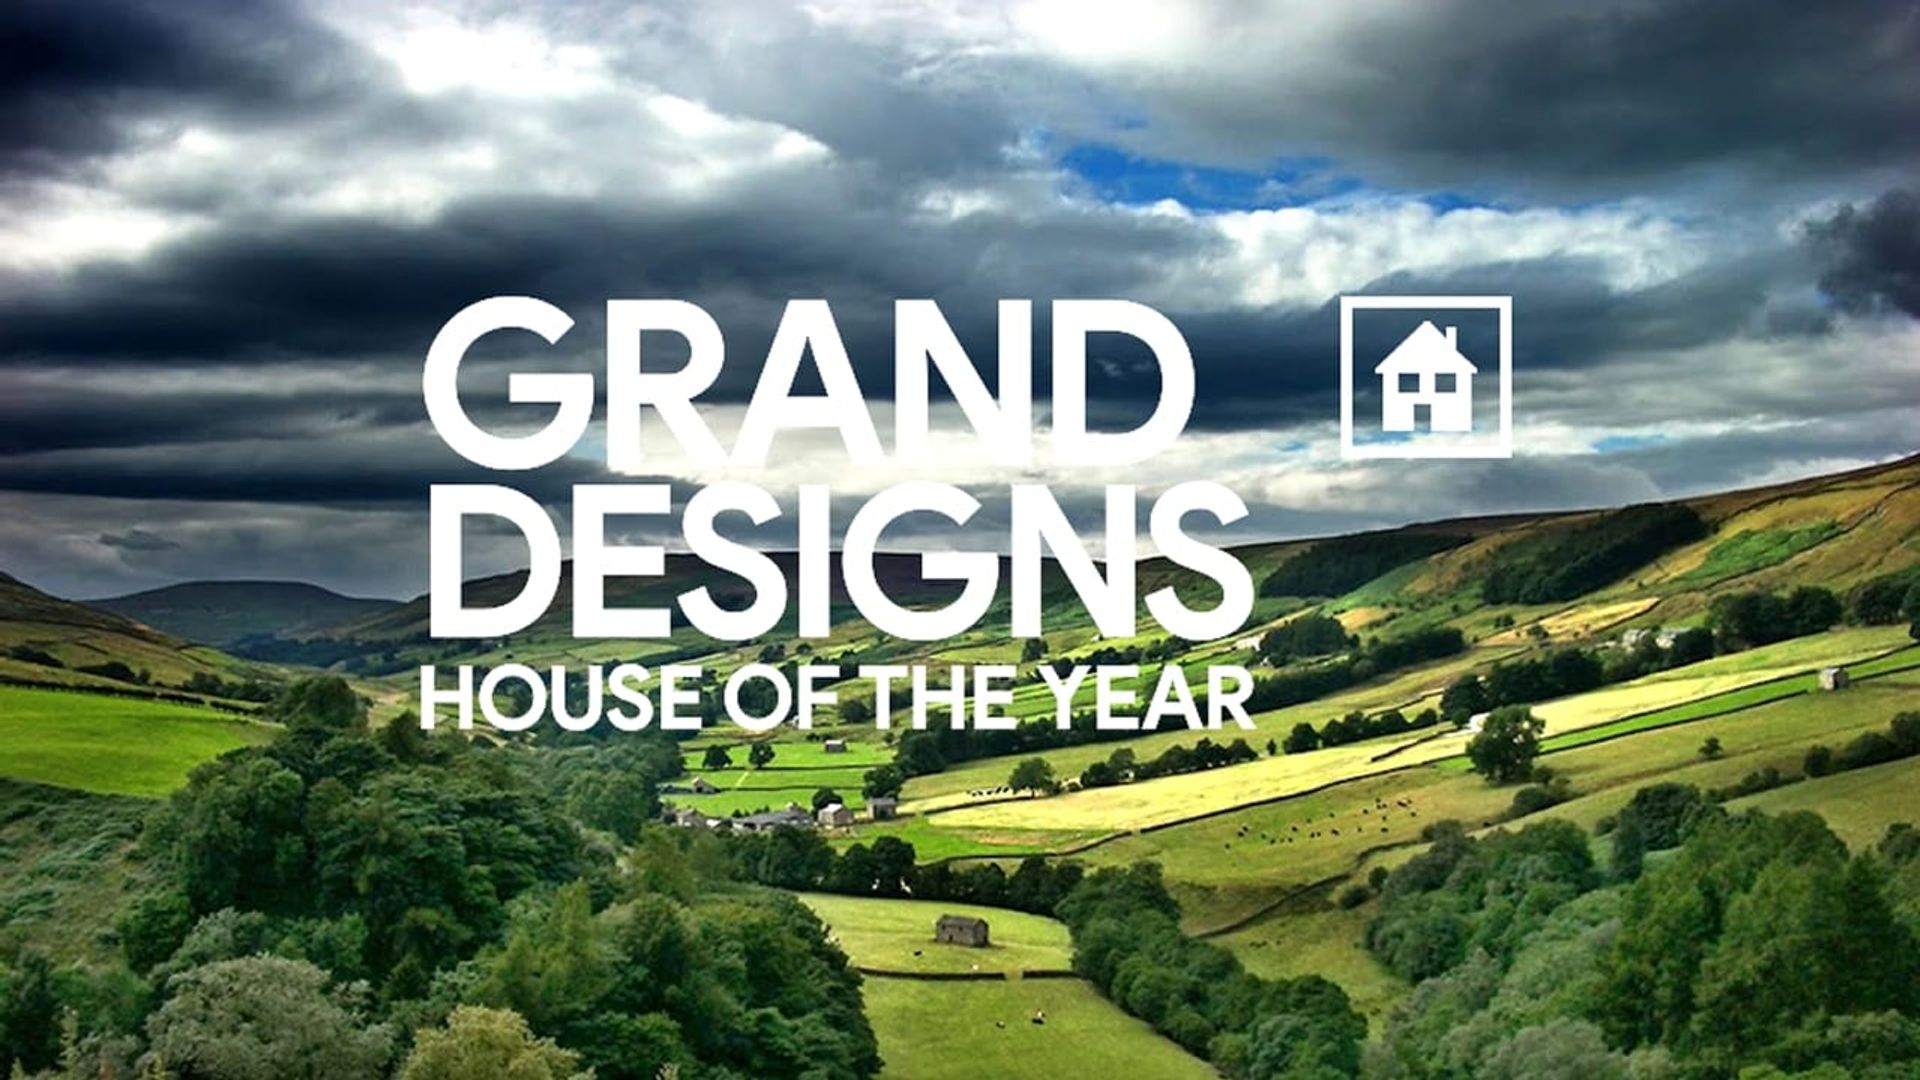 Grand Designs: House of the Year background